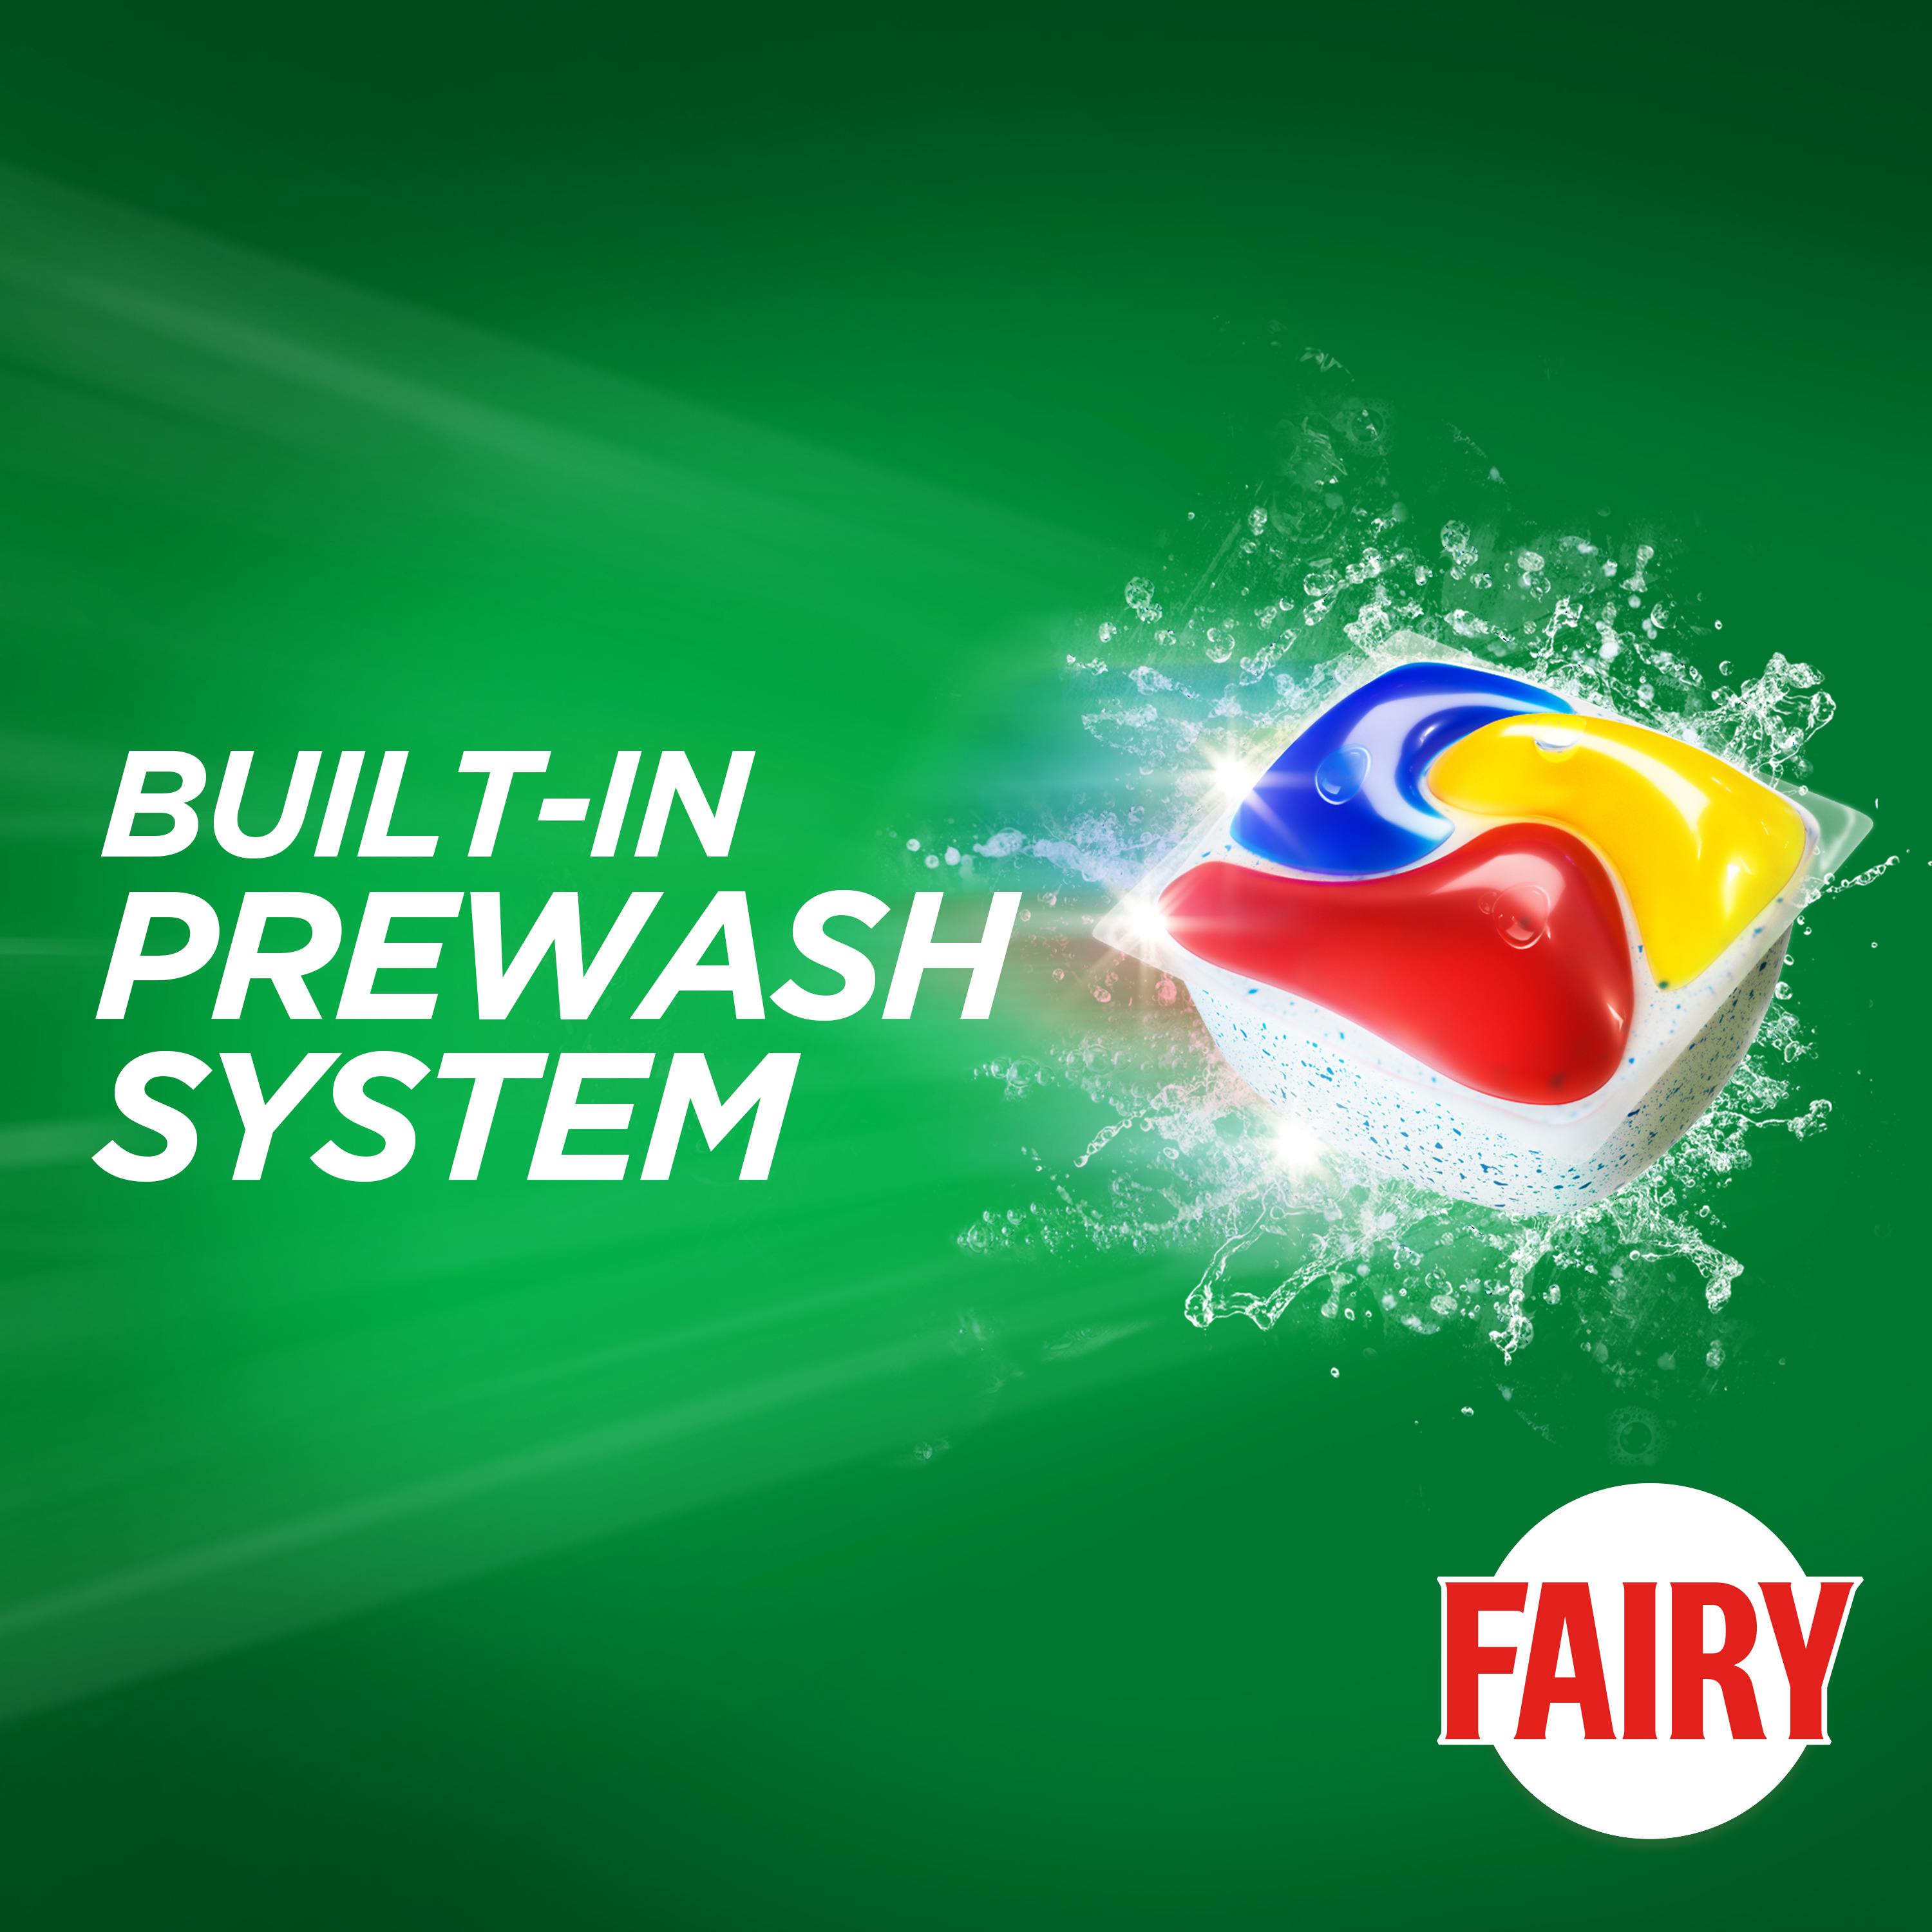 Fairy Platinum Plus Dishwasher Tablet comes with built-in pre wash system